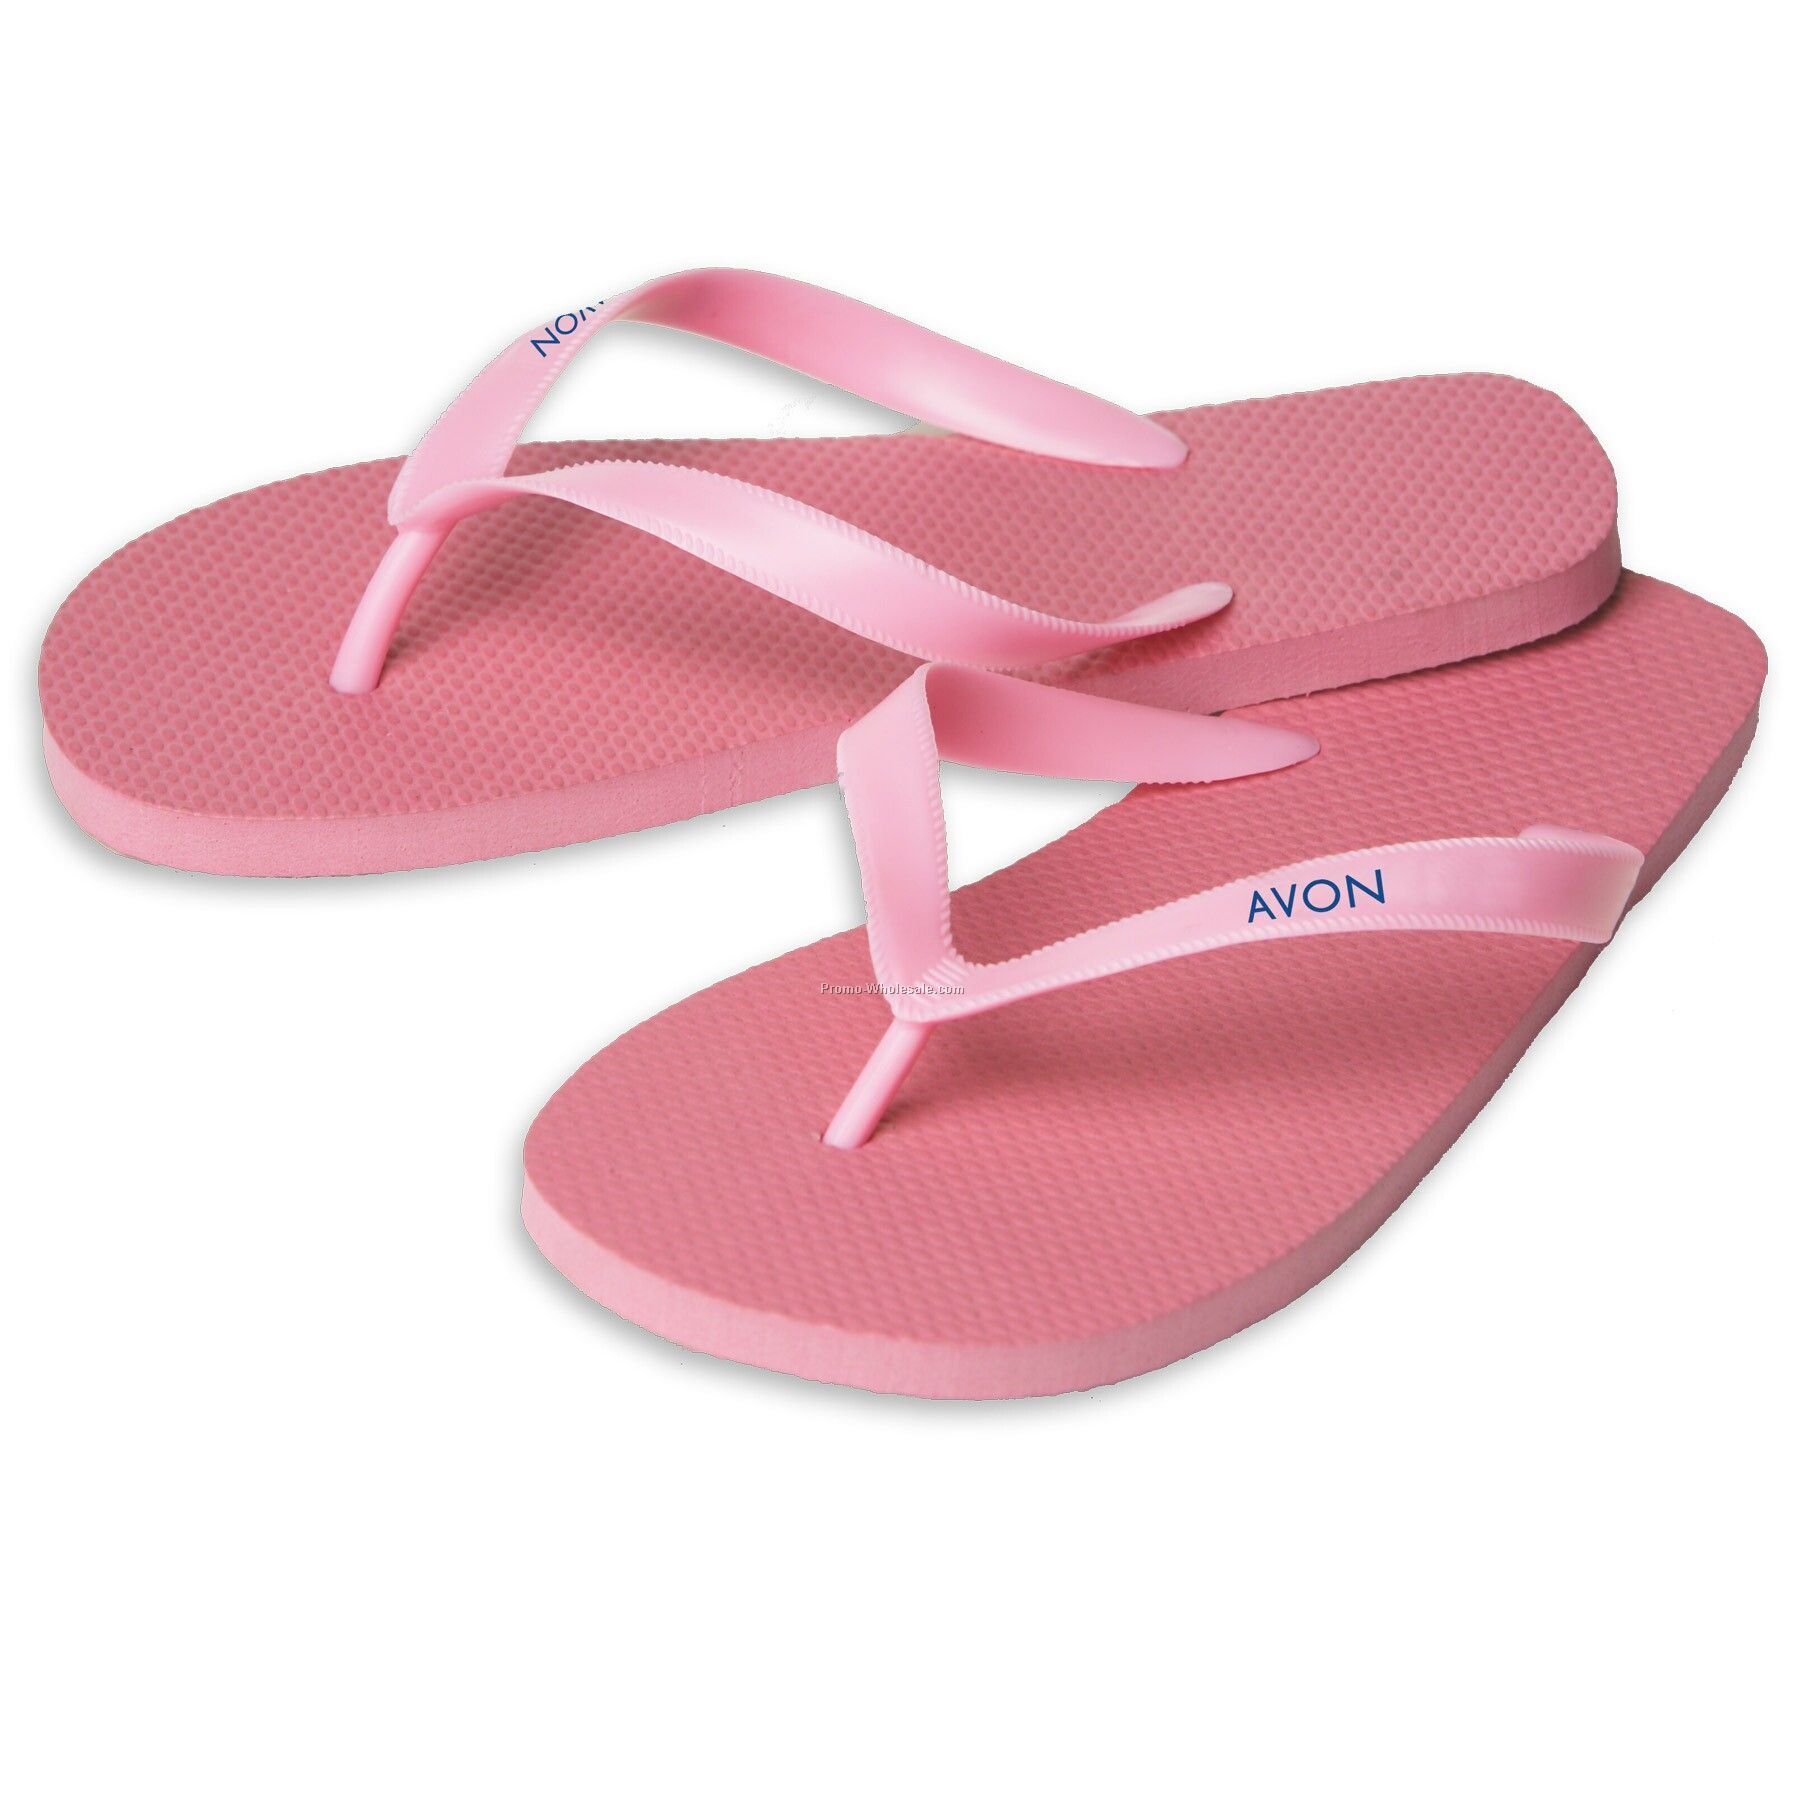 The Avalon Sandals - Classic Spa Style 12 Mm Sole Pvc Straps (Import)